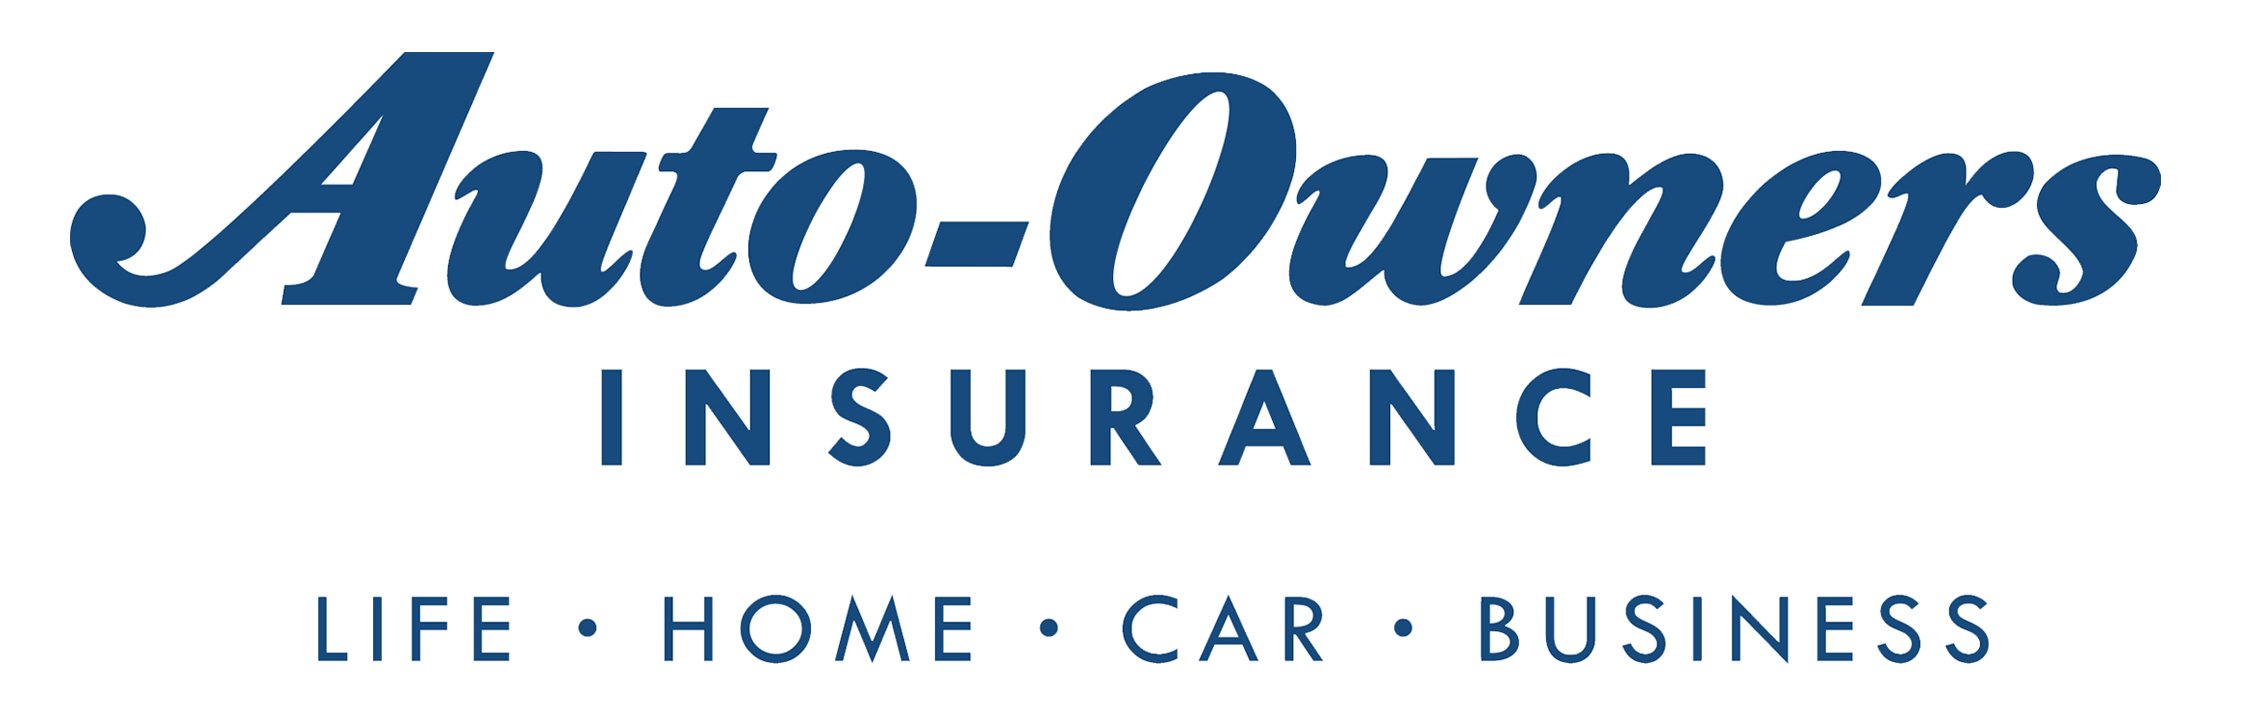 Auto-Owners Home Insurance